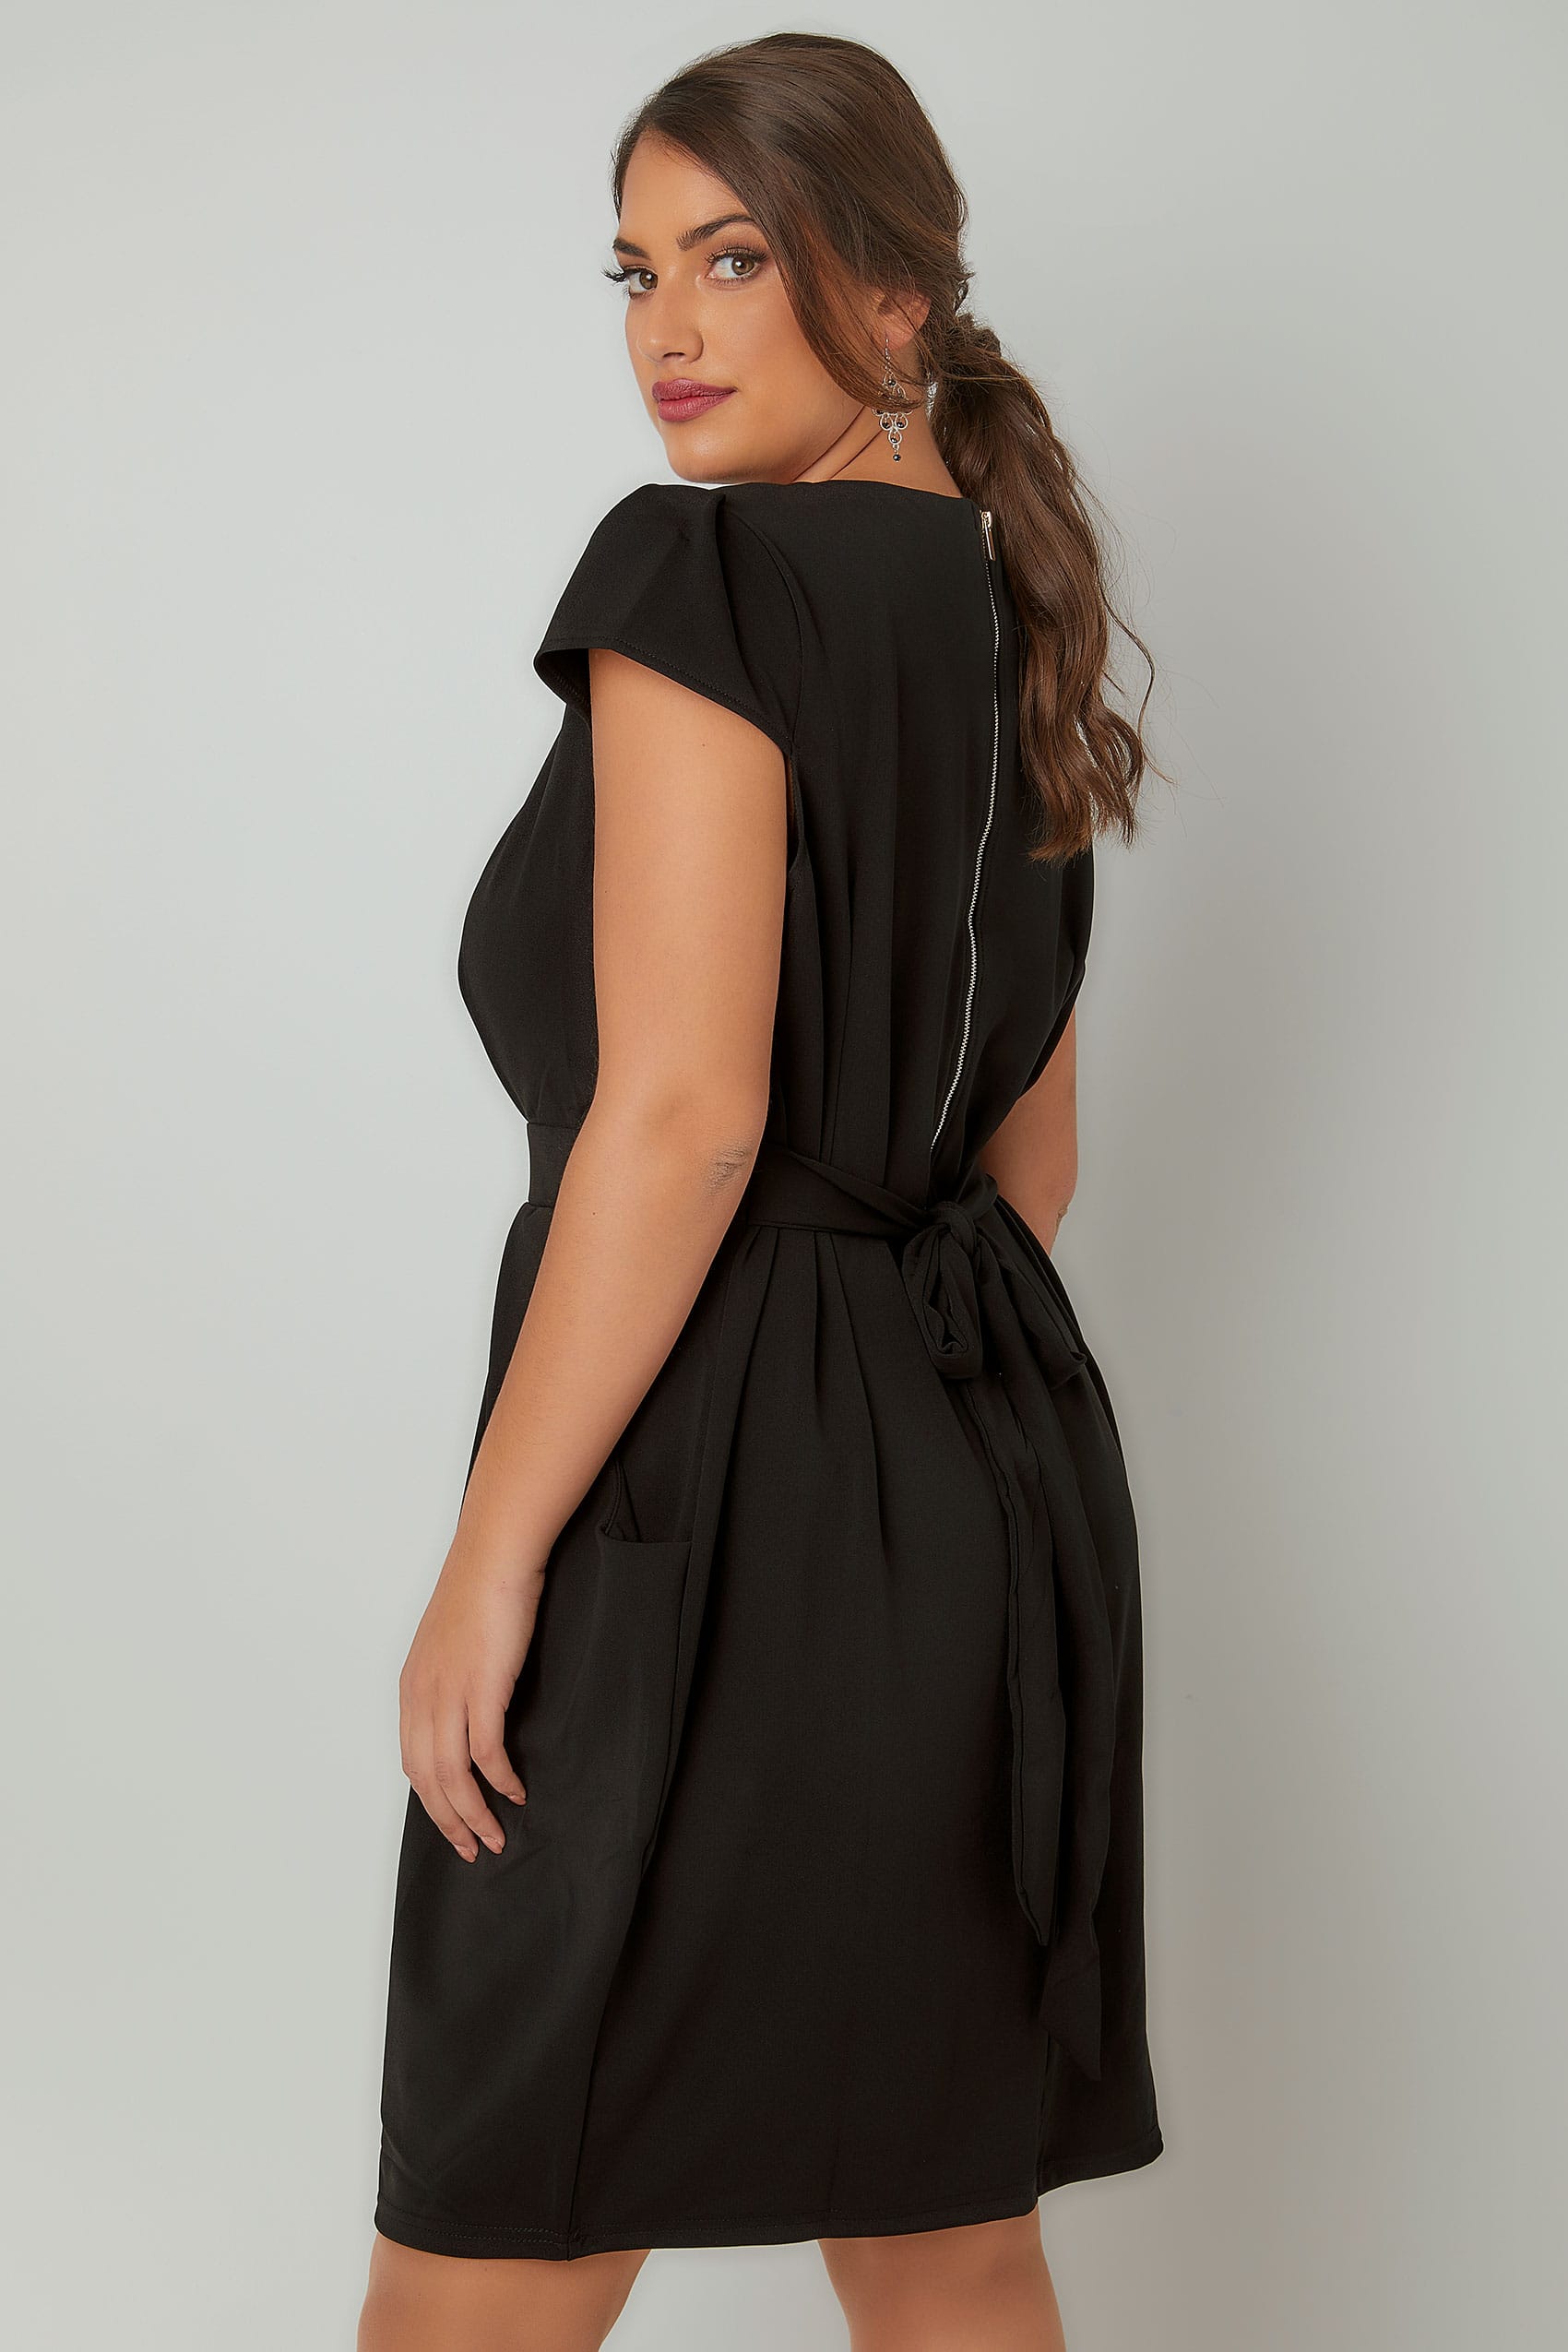 BLUE VANILLA CURVE Black Shift Dress With Pockets, Plus size 18 to 28